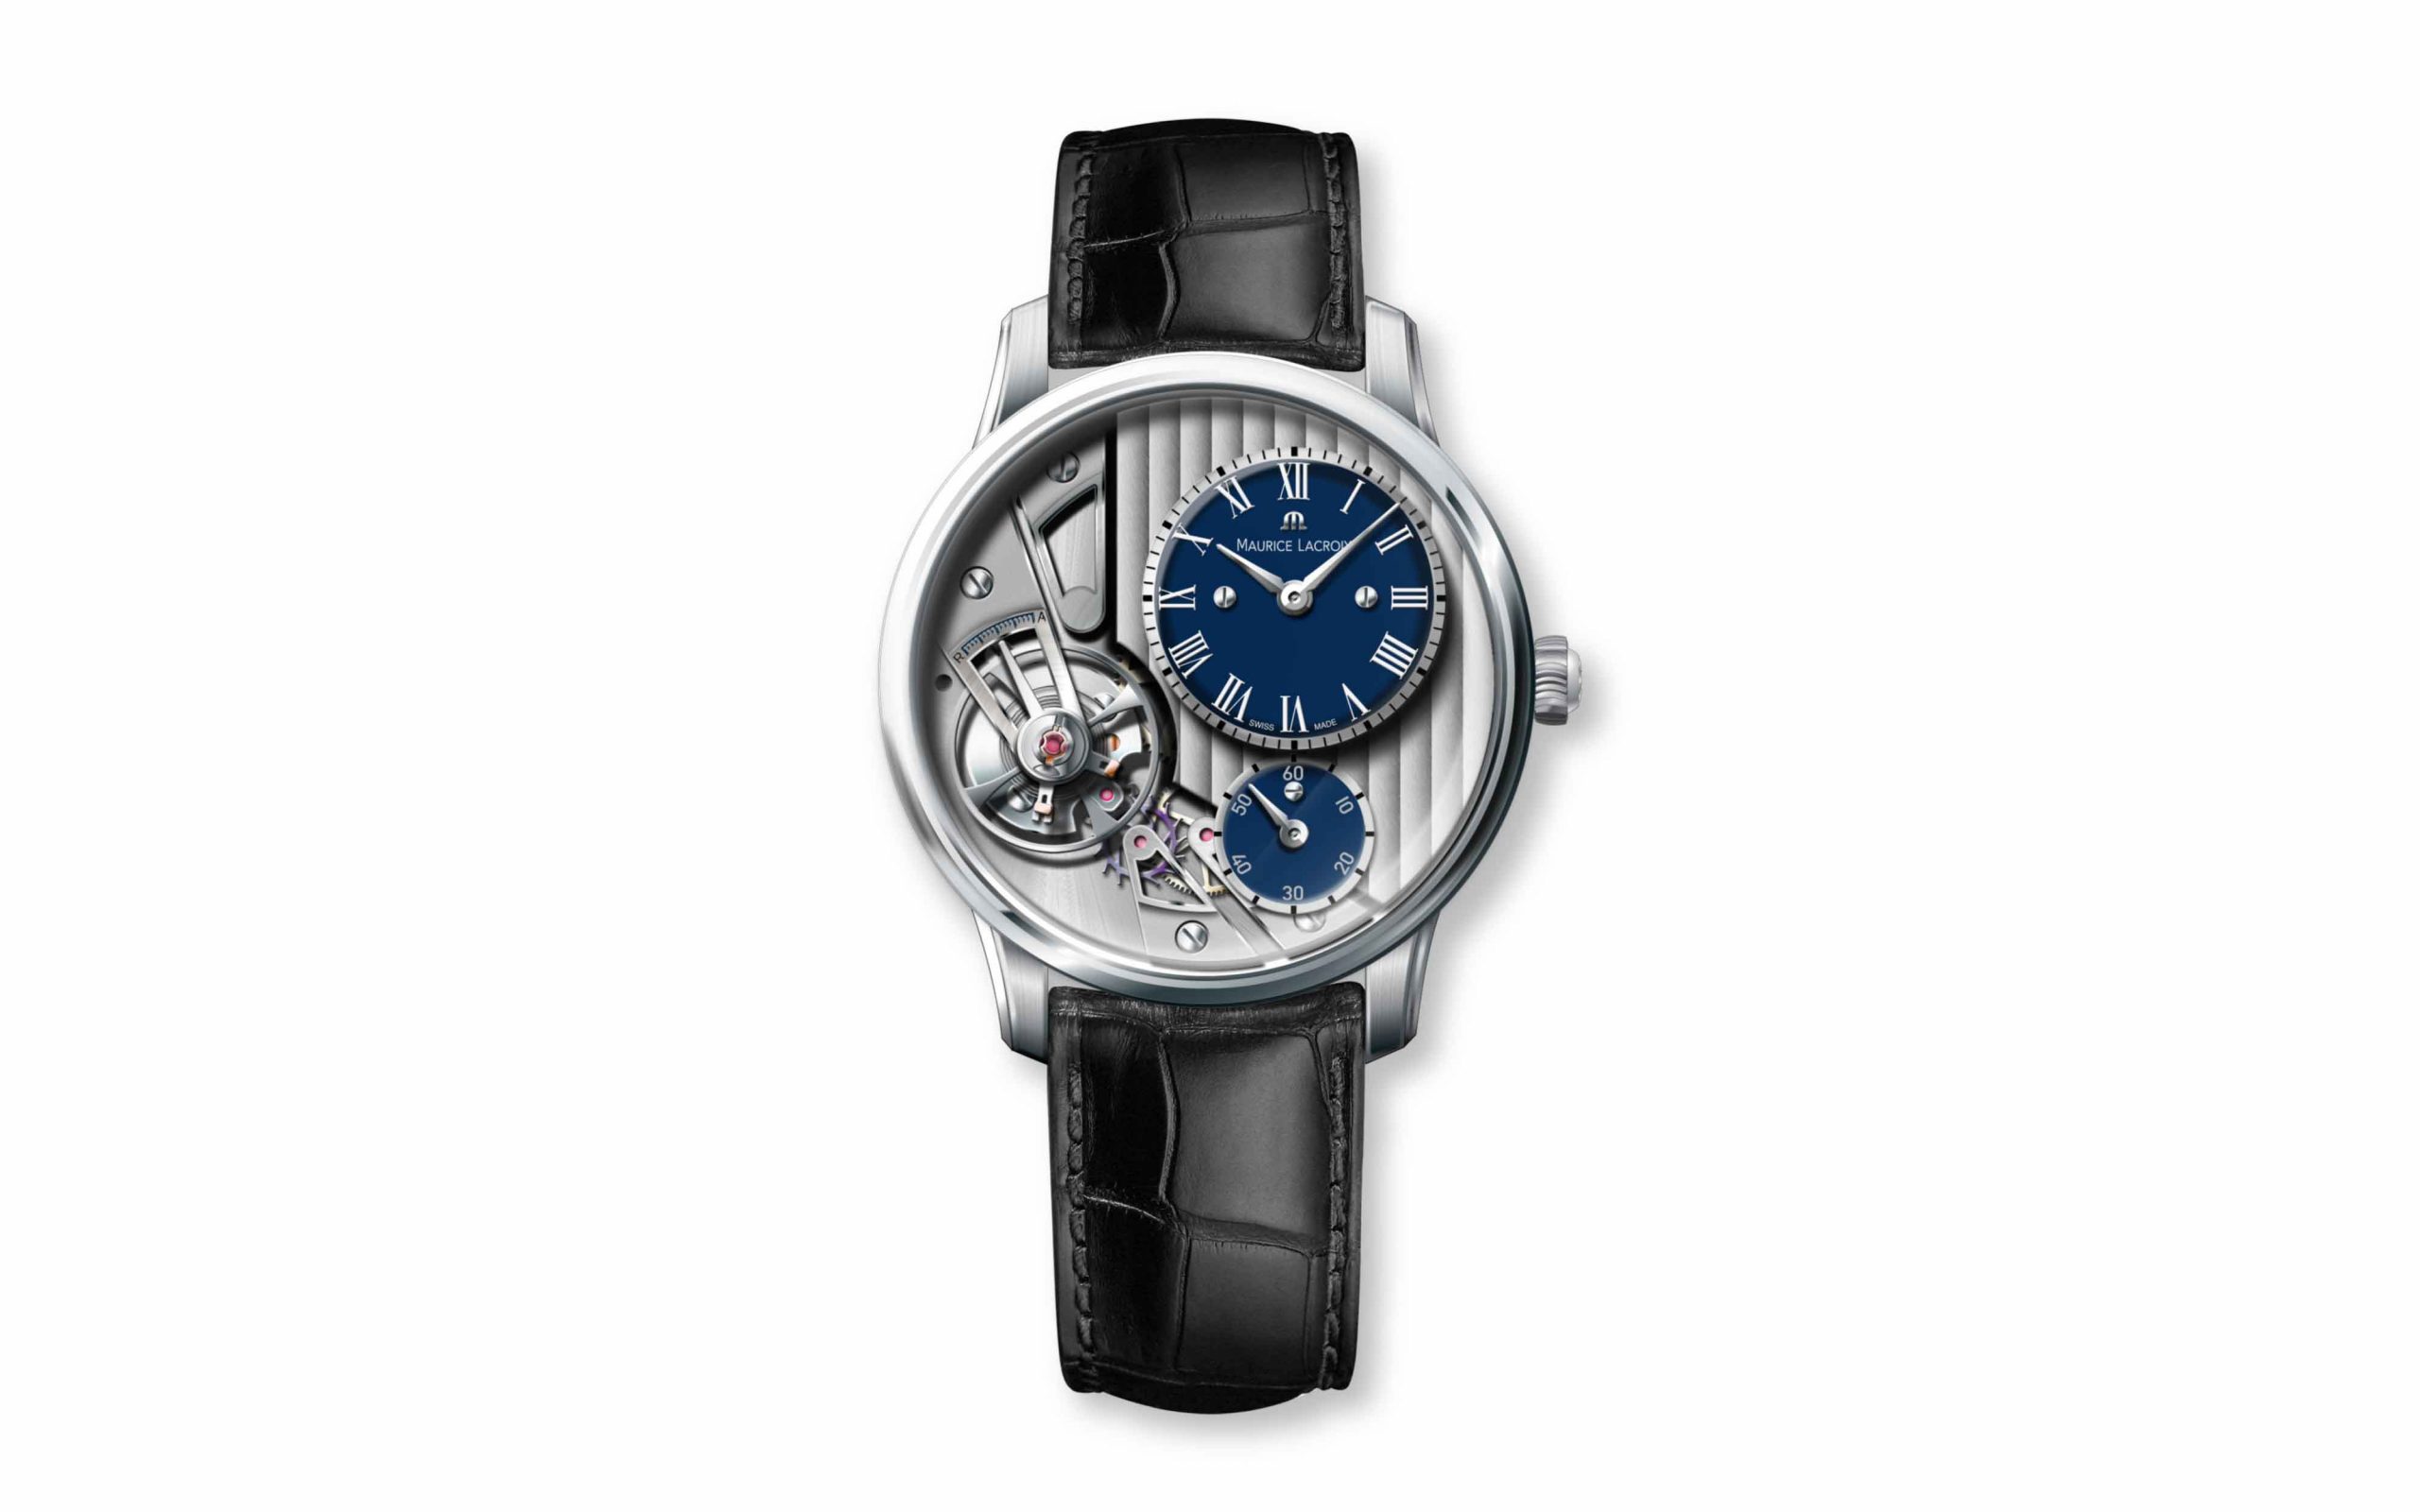 Harrods Introduces The Maurice Lacroix Materspiece Gravity “Harrods Exclusive Limited Edition”